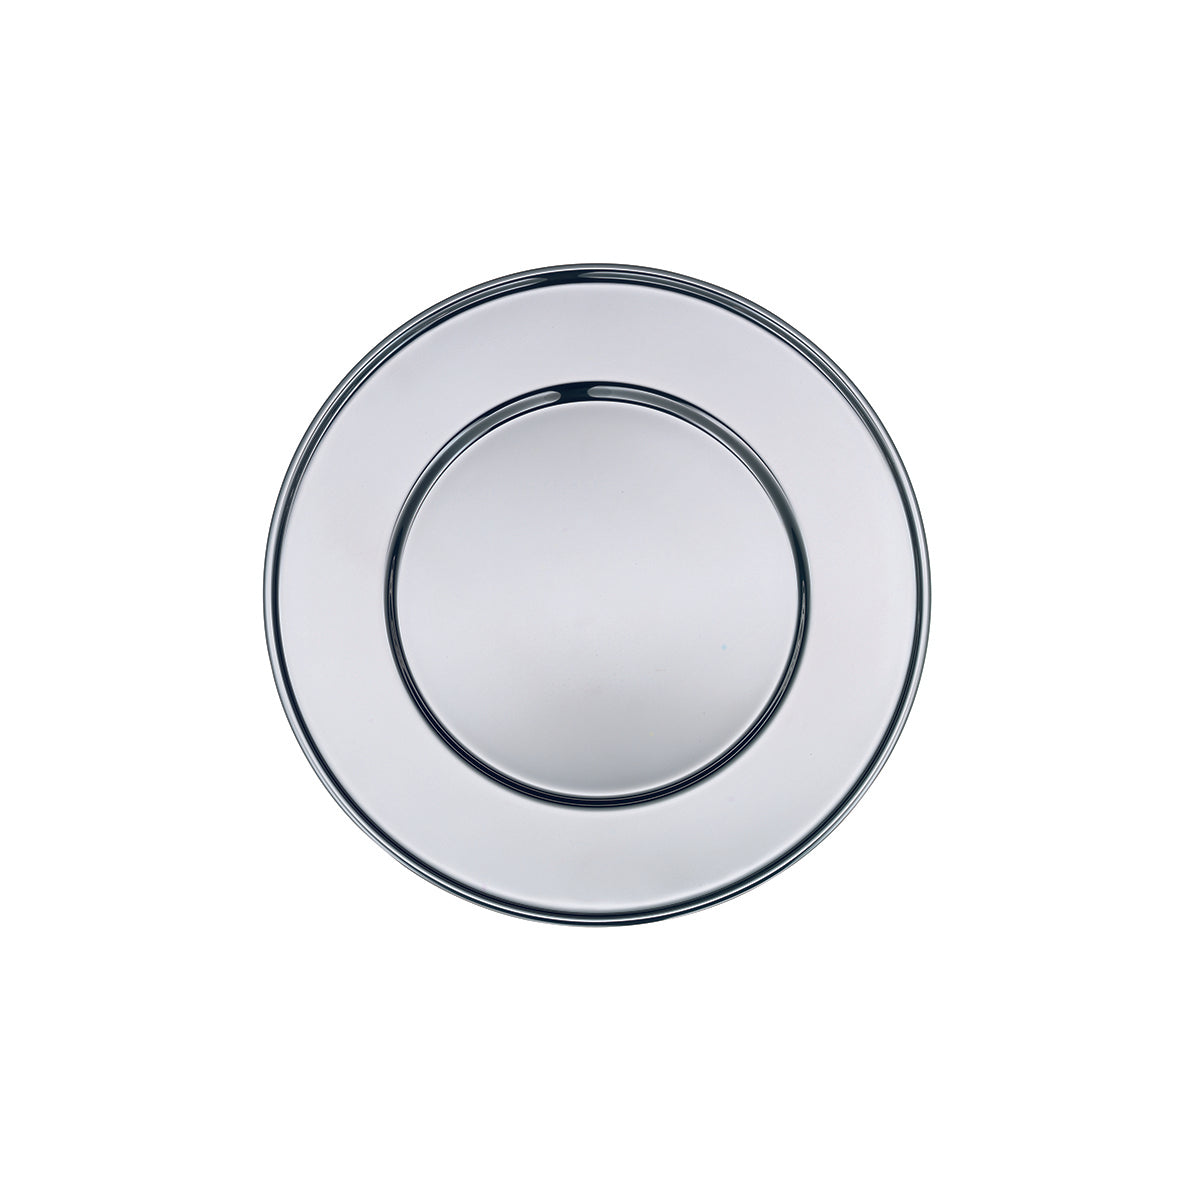 06.7416.9990 WMF Classic Round Plate / Tray 320mm Stainless Steel Tomkin Australia Hospitality Supplies